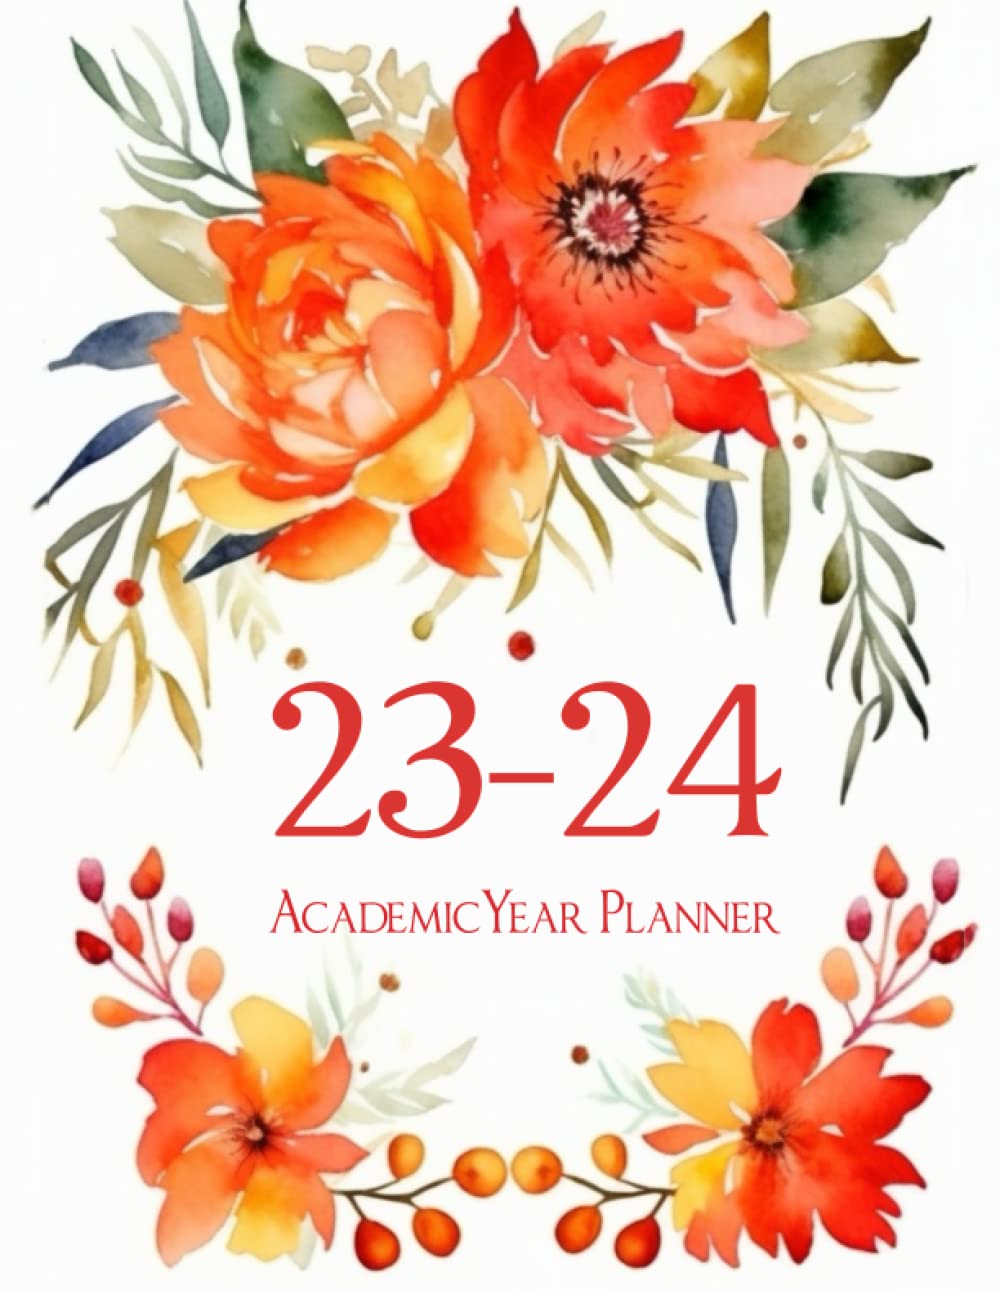 2023-2024 Large Academic Planner: Weekly and Monthly Academic Planner with To-Do List: Academic Year Planner: Manage Your Time Effectively with the 2023-2024 Academic Planner